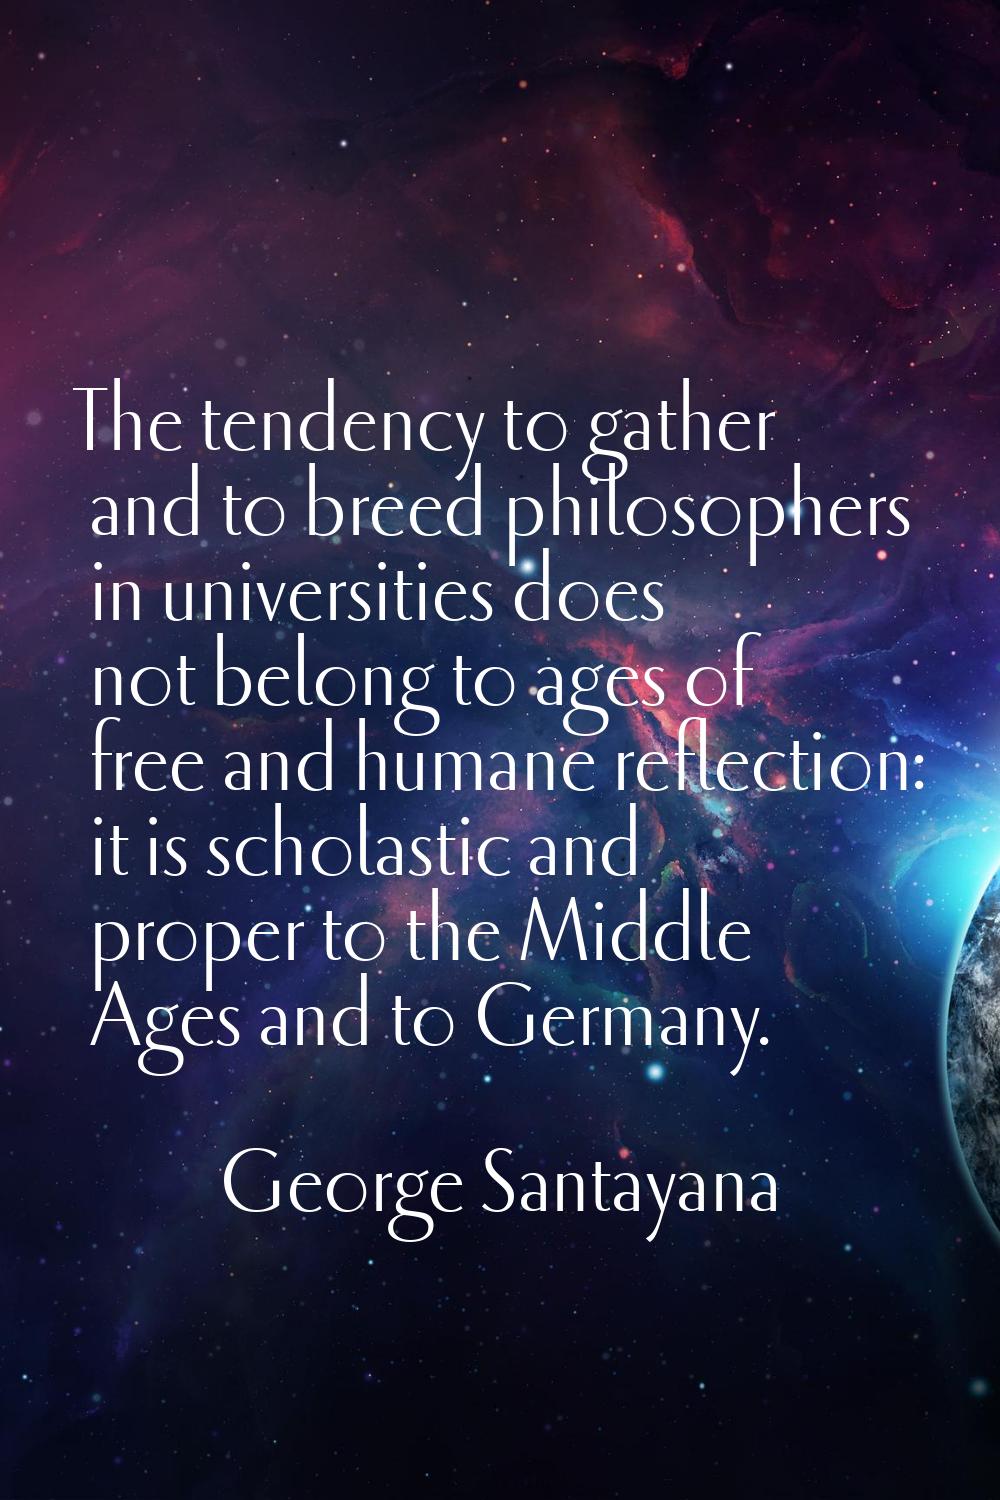 The tendency to gather and to breed philosophers in universities does not belong to ages of free an